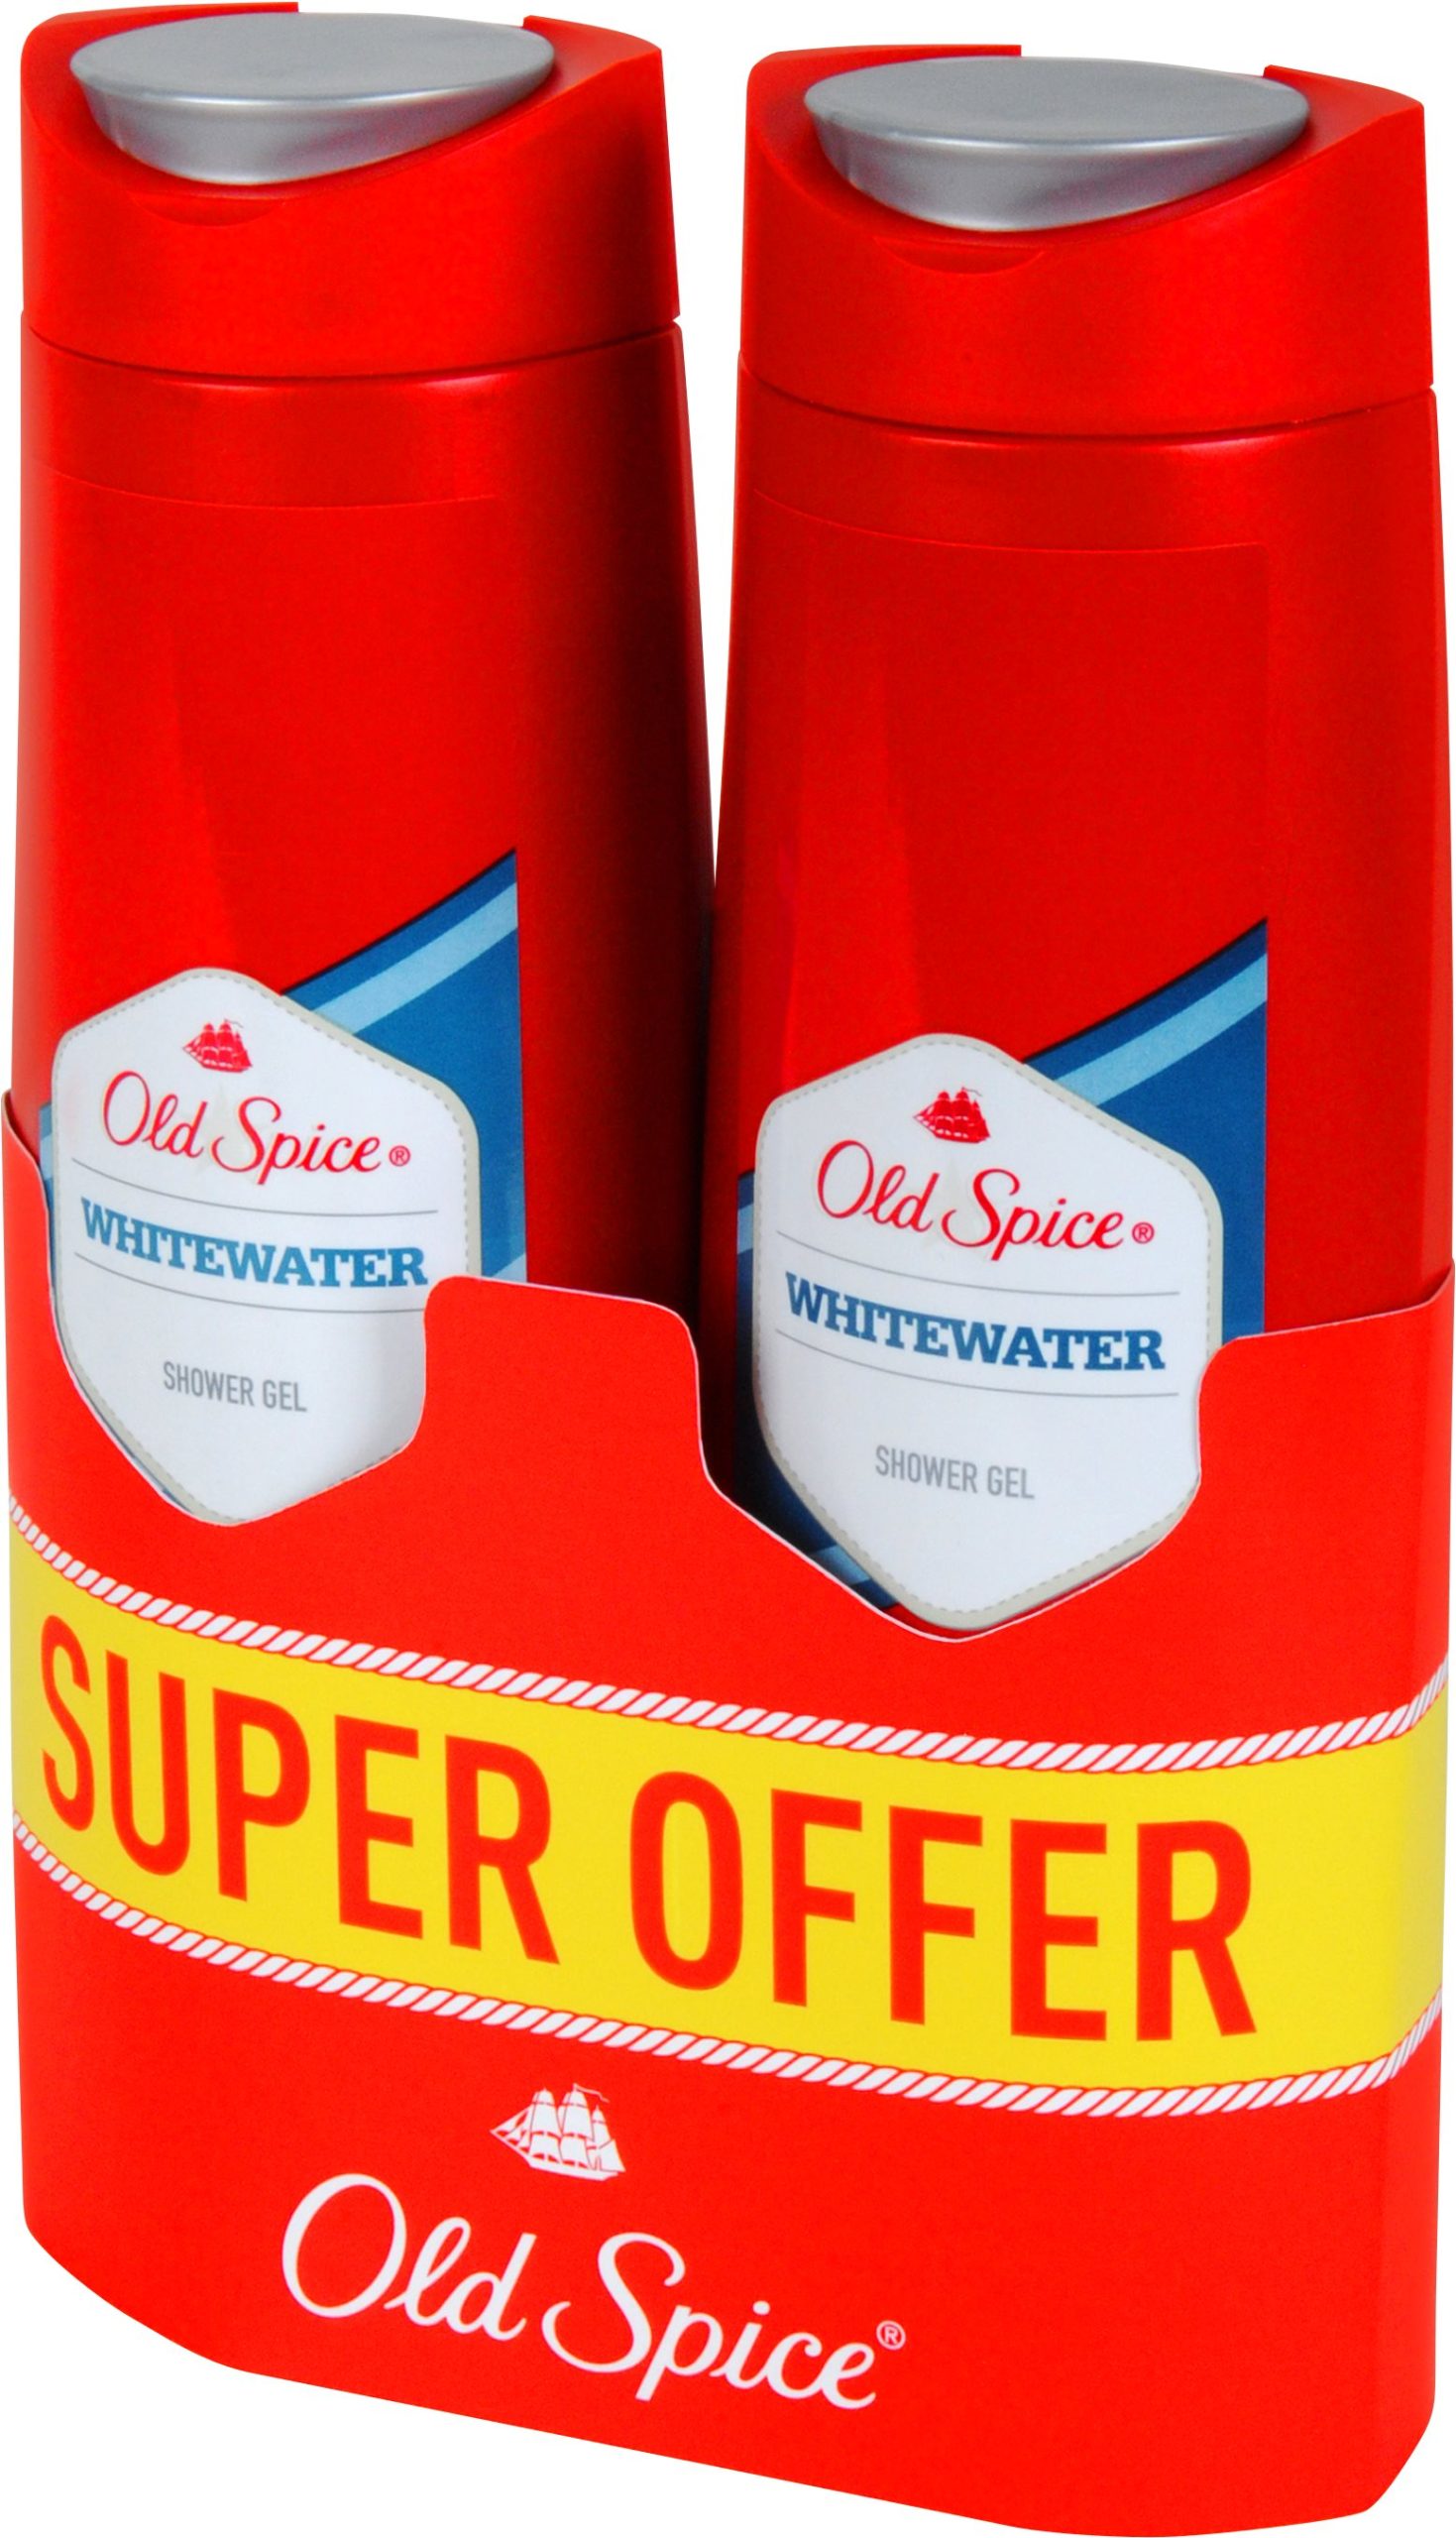 Tusfürdő OLD SPICE Whitewater Shower Gel pack 2× 400 ml